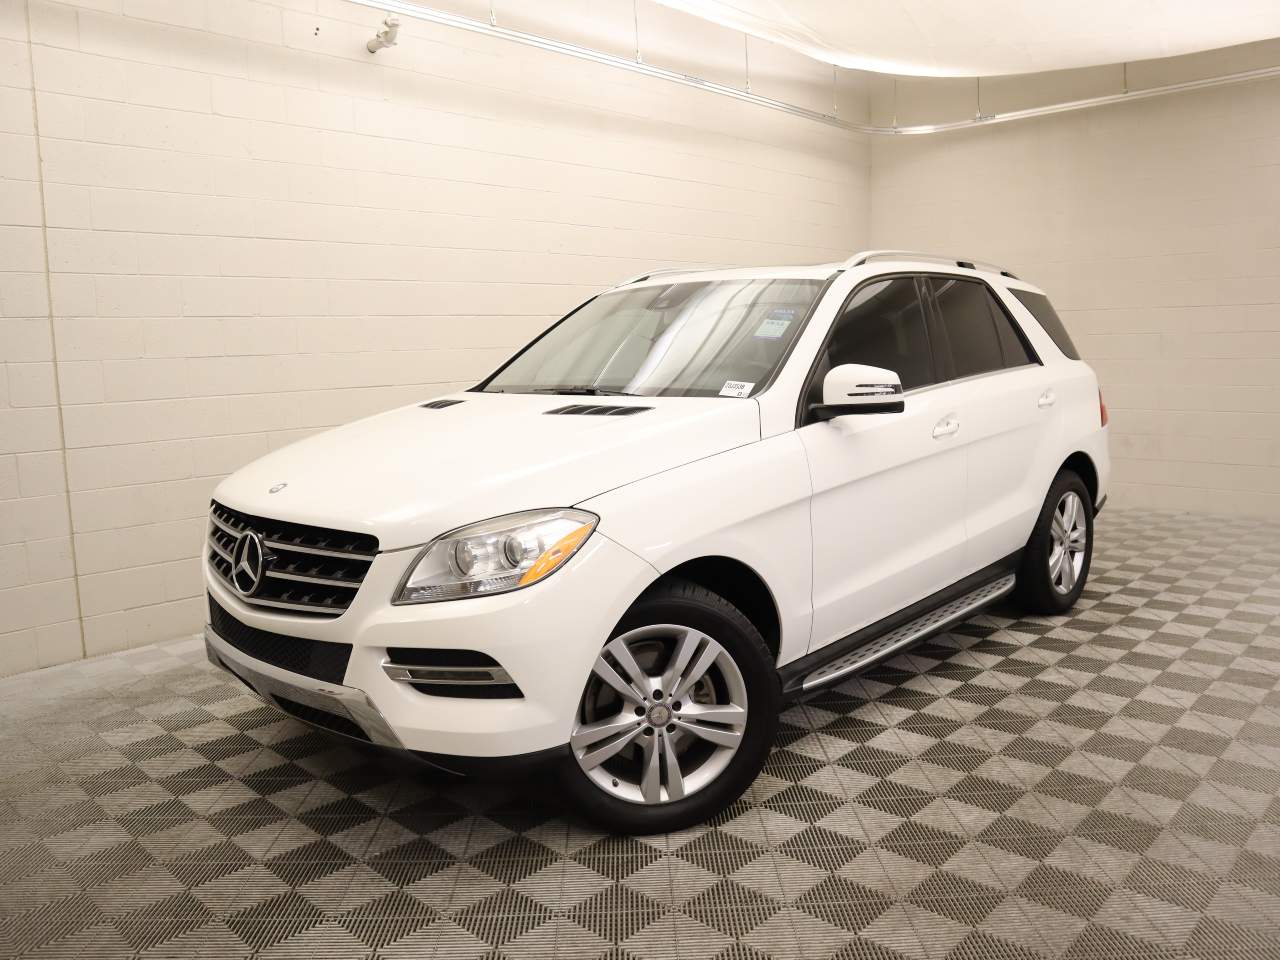 Used Mercedes-Benz M-Class for Sale (with Photos) - CarGurus